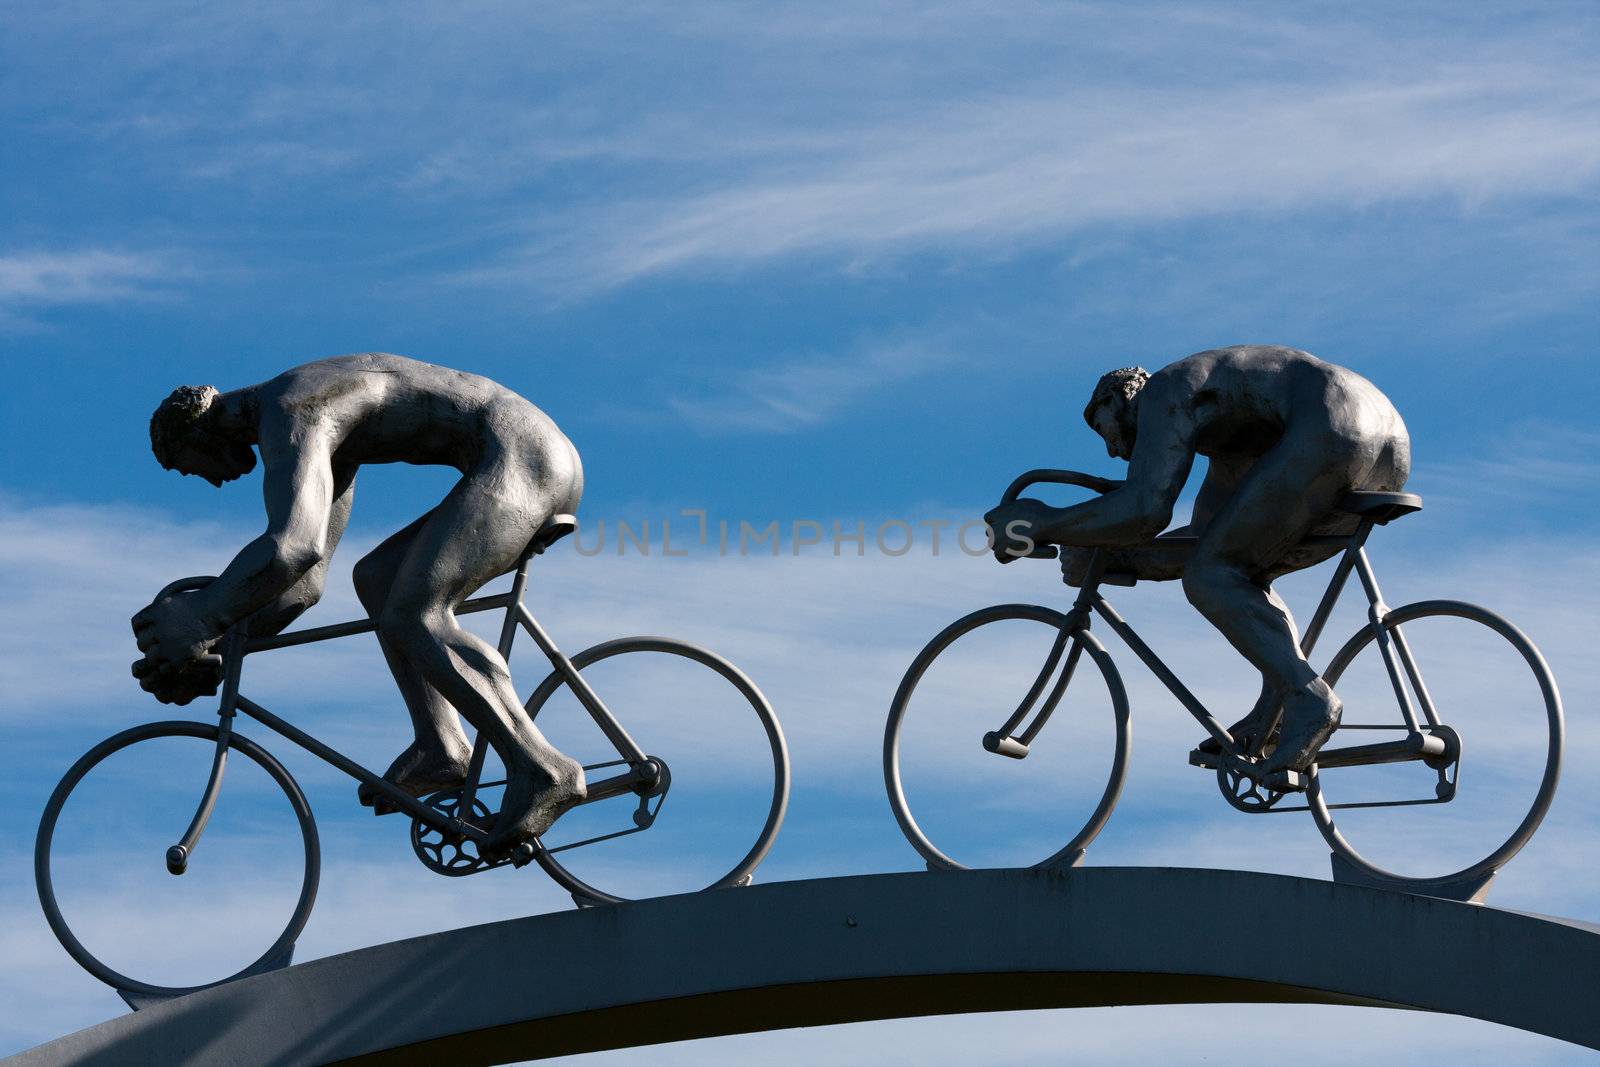 Two cyclists in full effort, detail of a sculpture